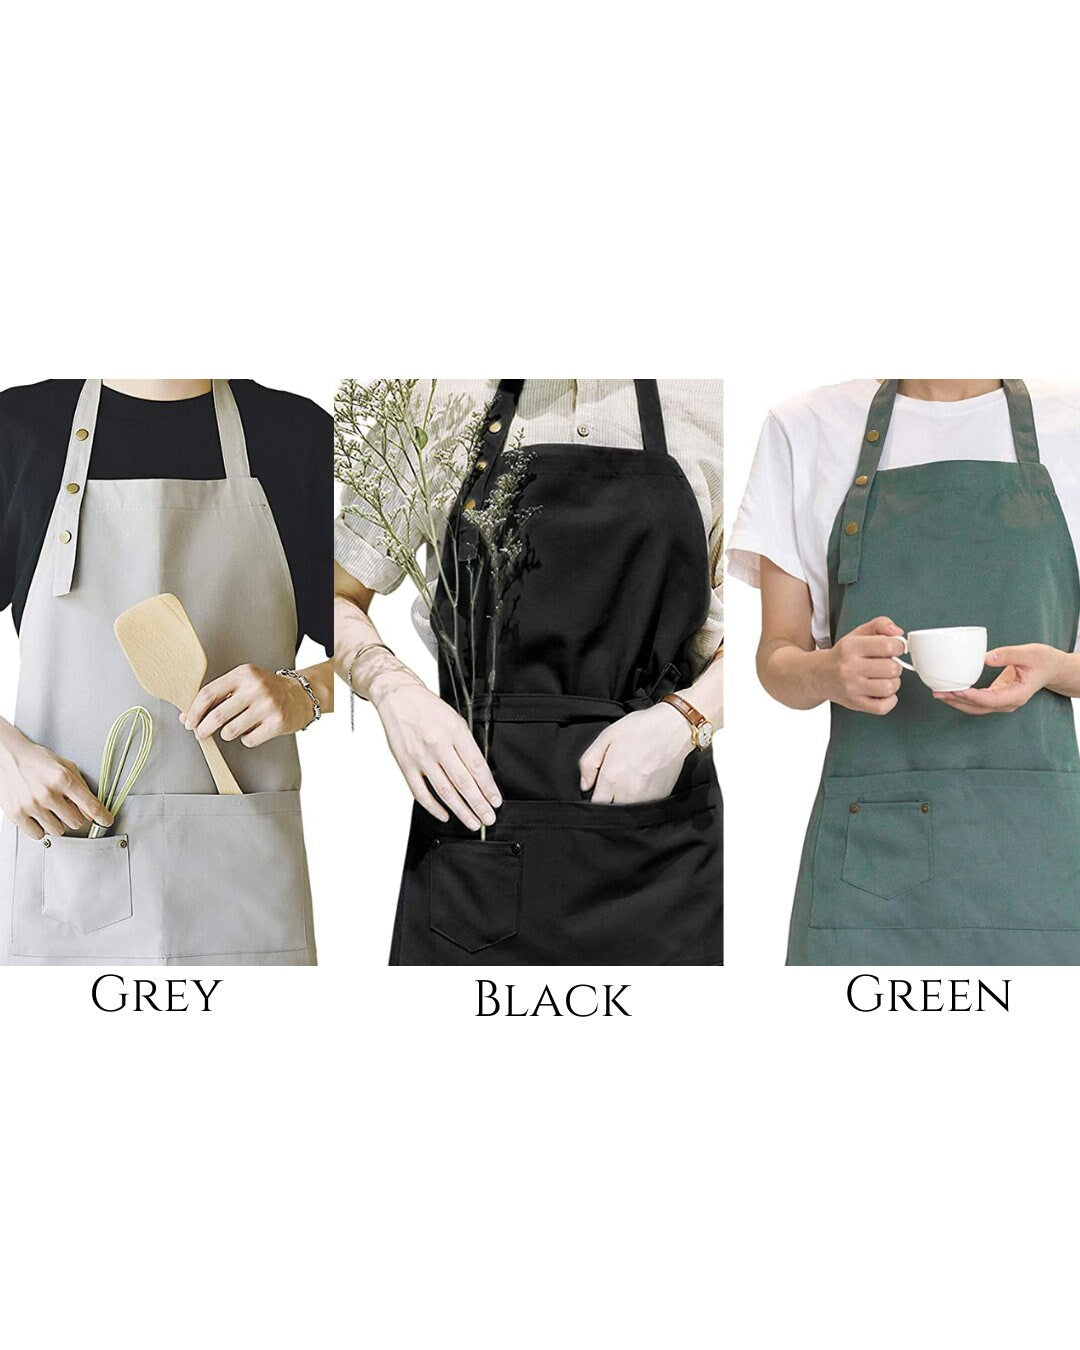 Personalized Aprons - Aprons for Women - Aprons for Men - Embroidered Cooking Apron with Pocket - Apron with Name - Cooking Gift